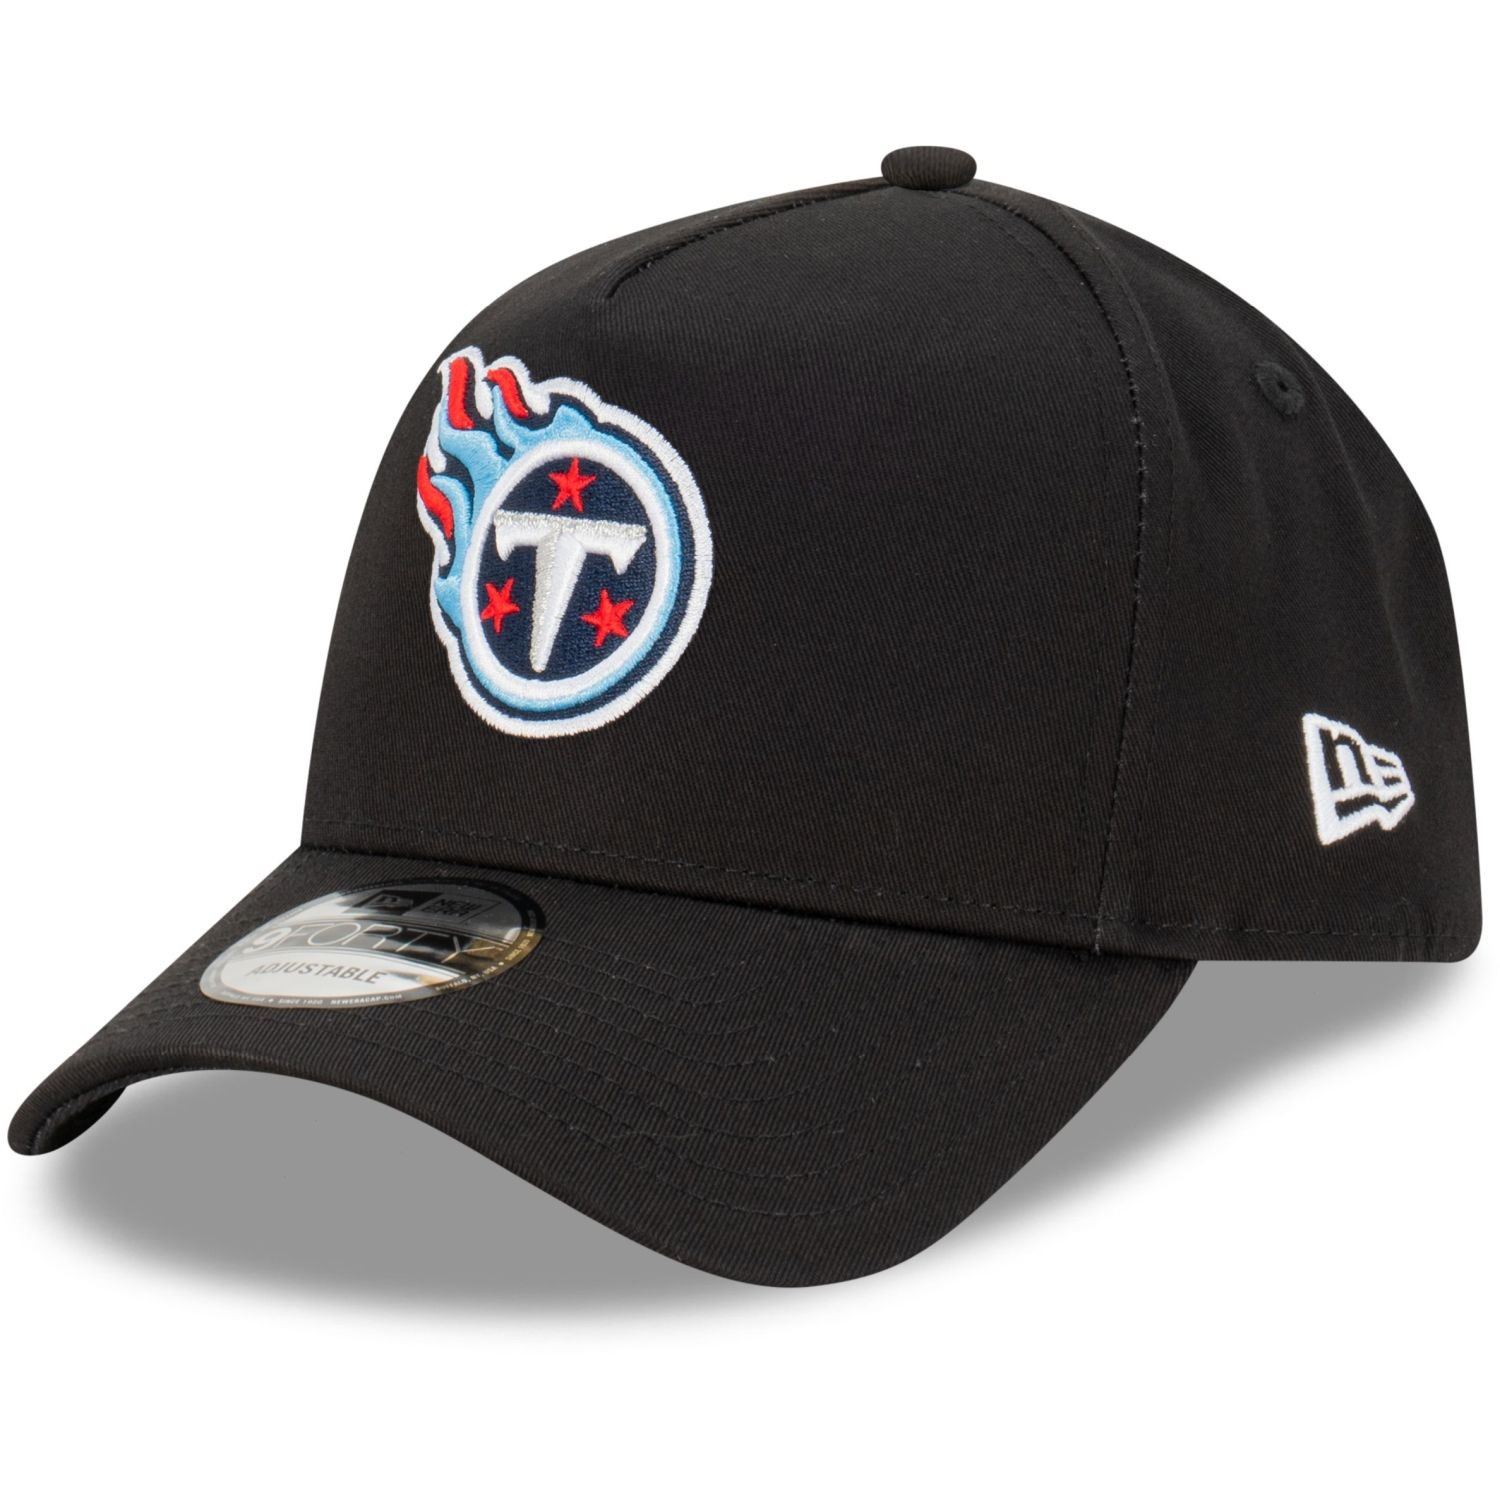 Tennessee Titans NFL Evergreen Black 9Forty Adjustable A-Frame Cap New Era